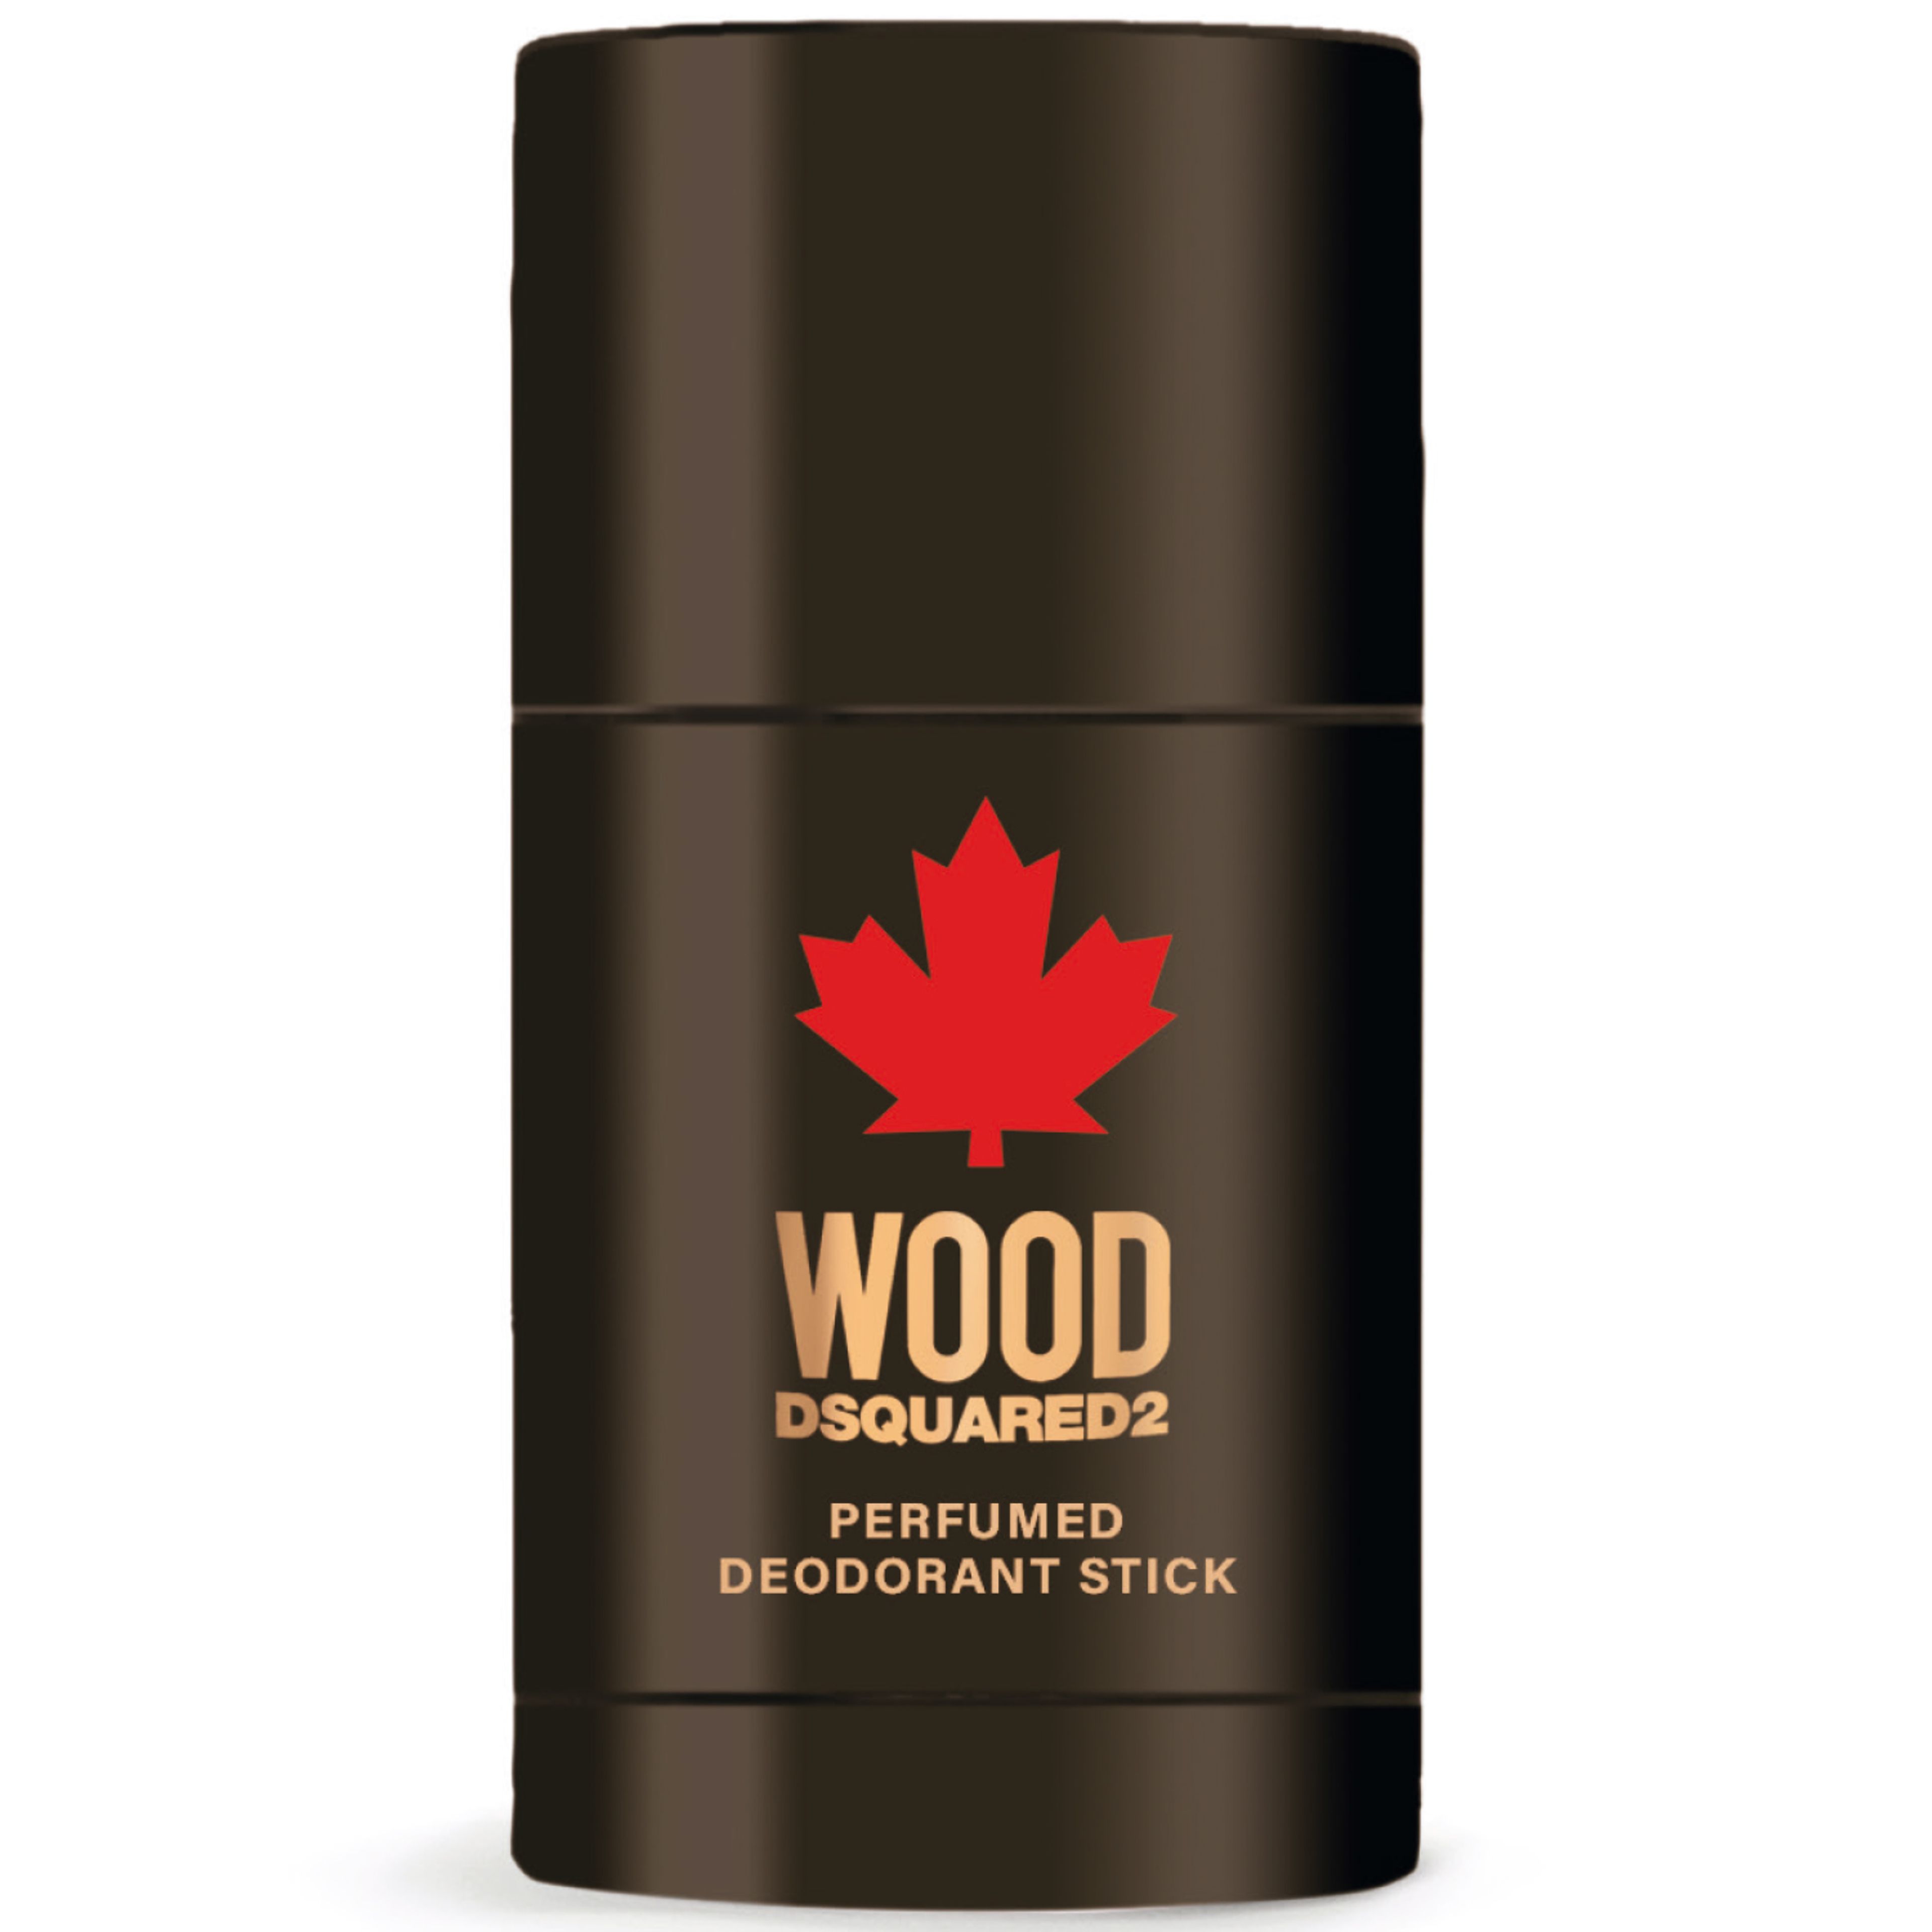 Wood Pour Homme Perfumed Deodorant Stick Dsquared2 1